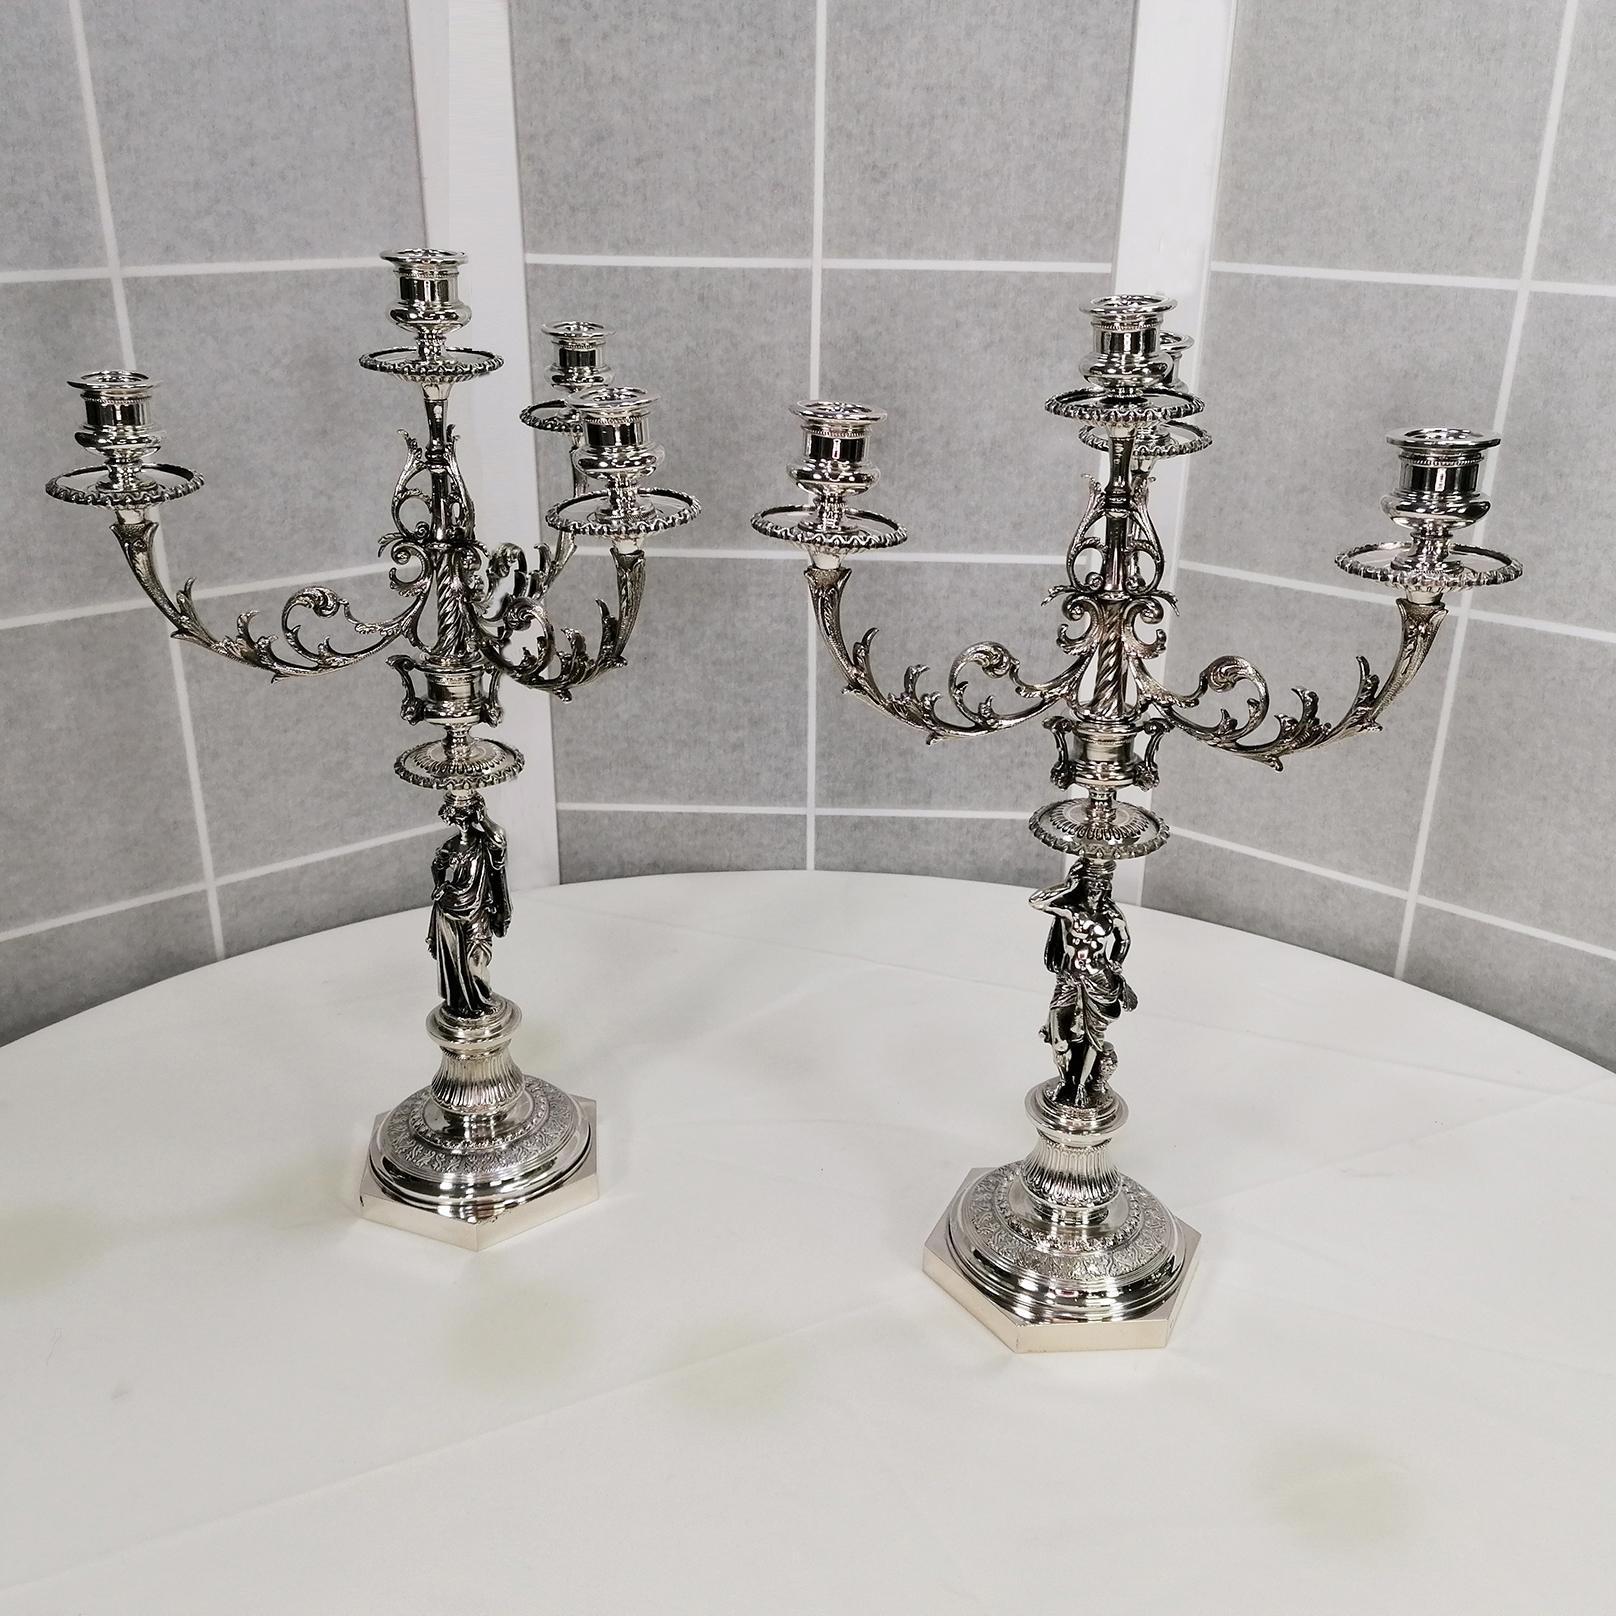 XX Century Italian Solid Silver pair of Candelabras For Sale 11